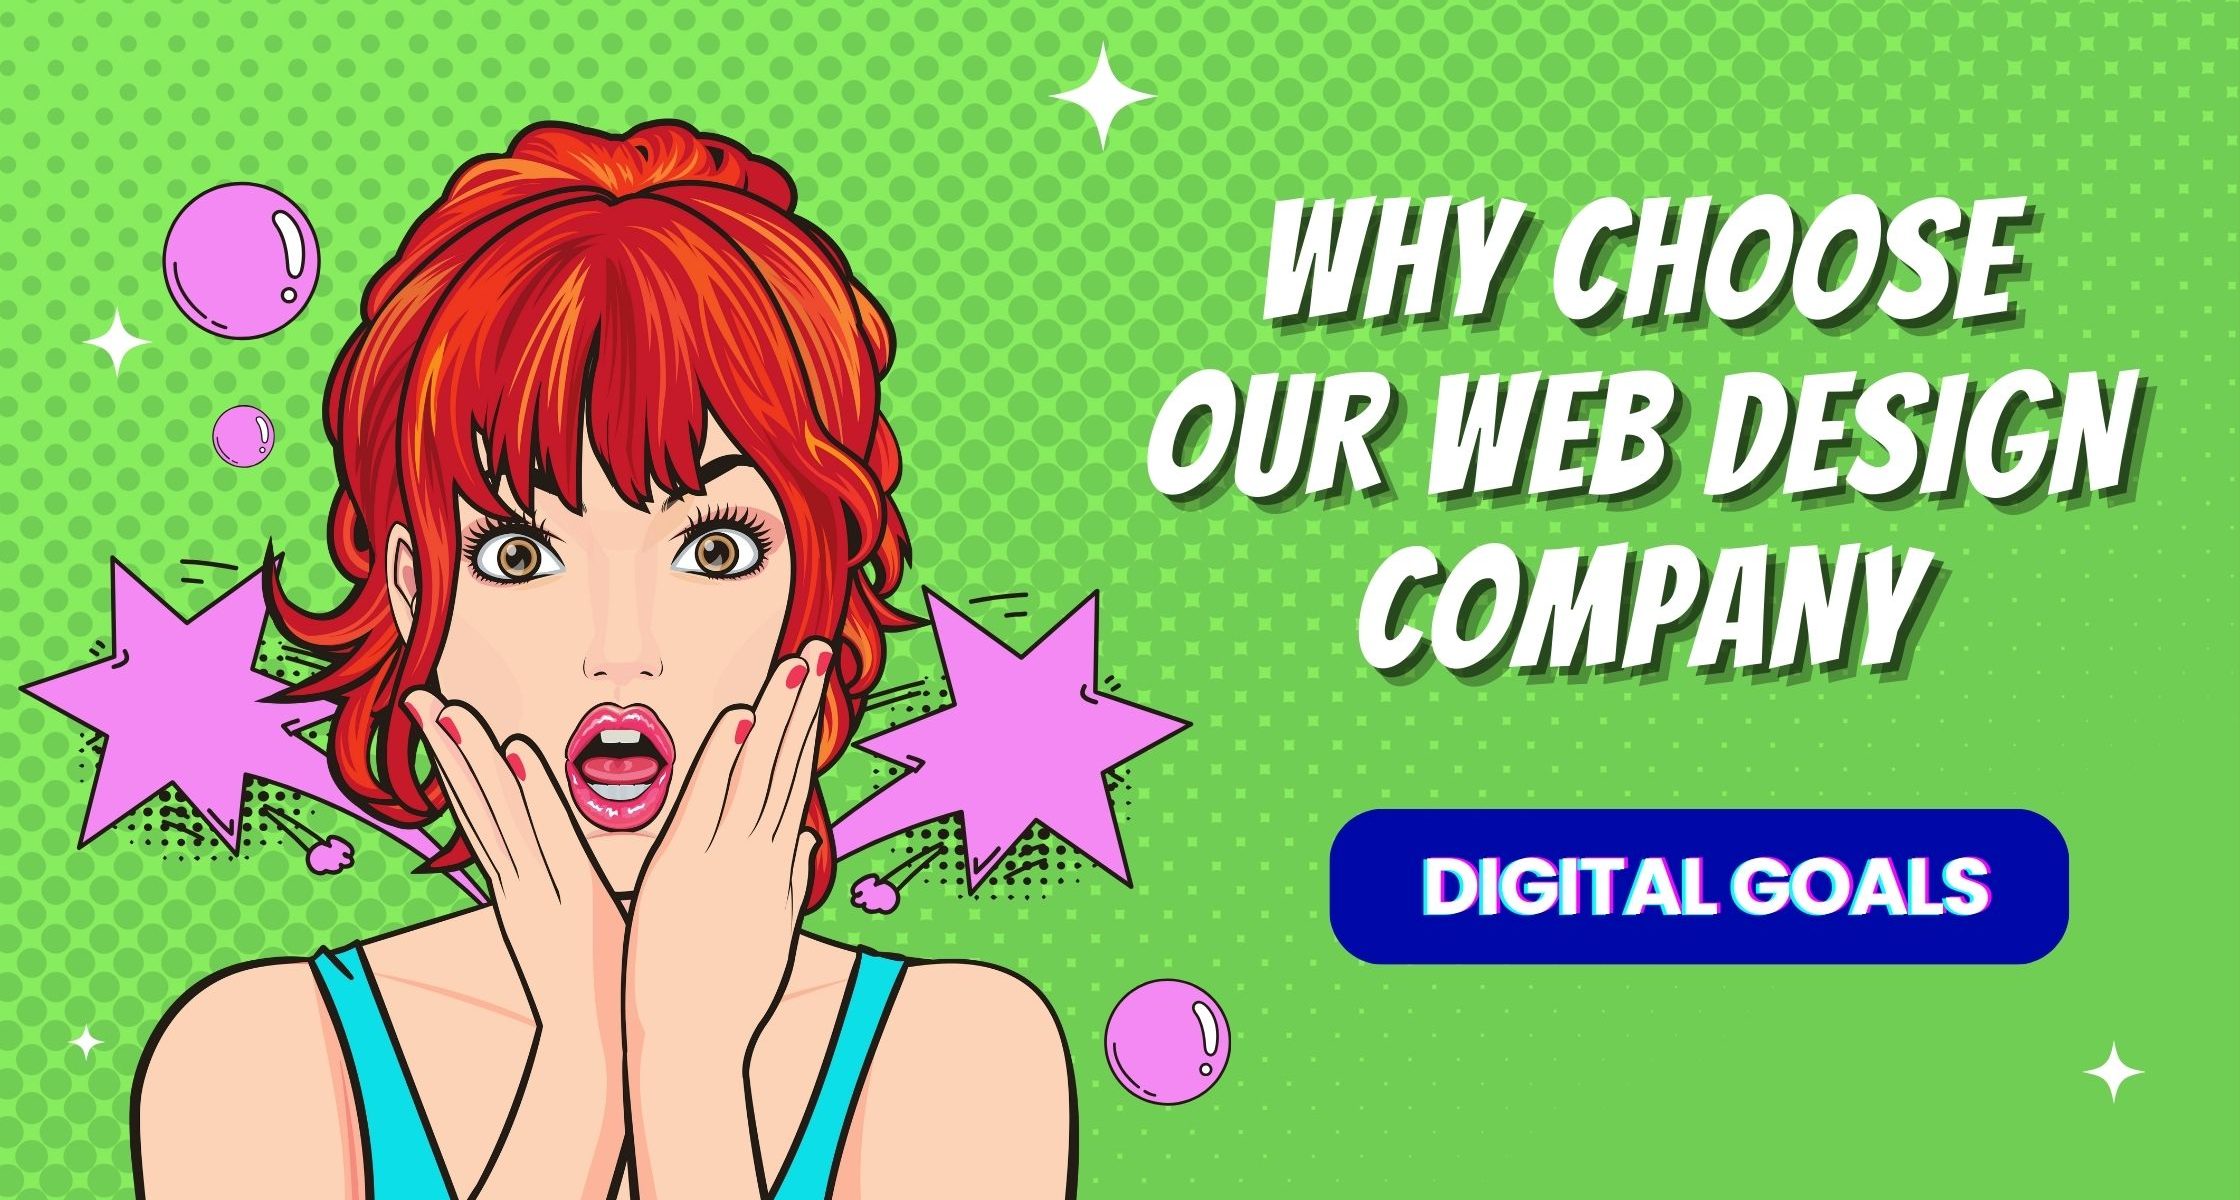 Popart images showing a women being surprised. Title is "Why choose our web design company"